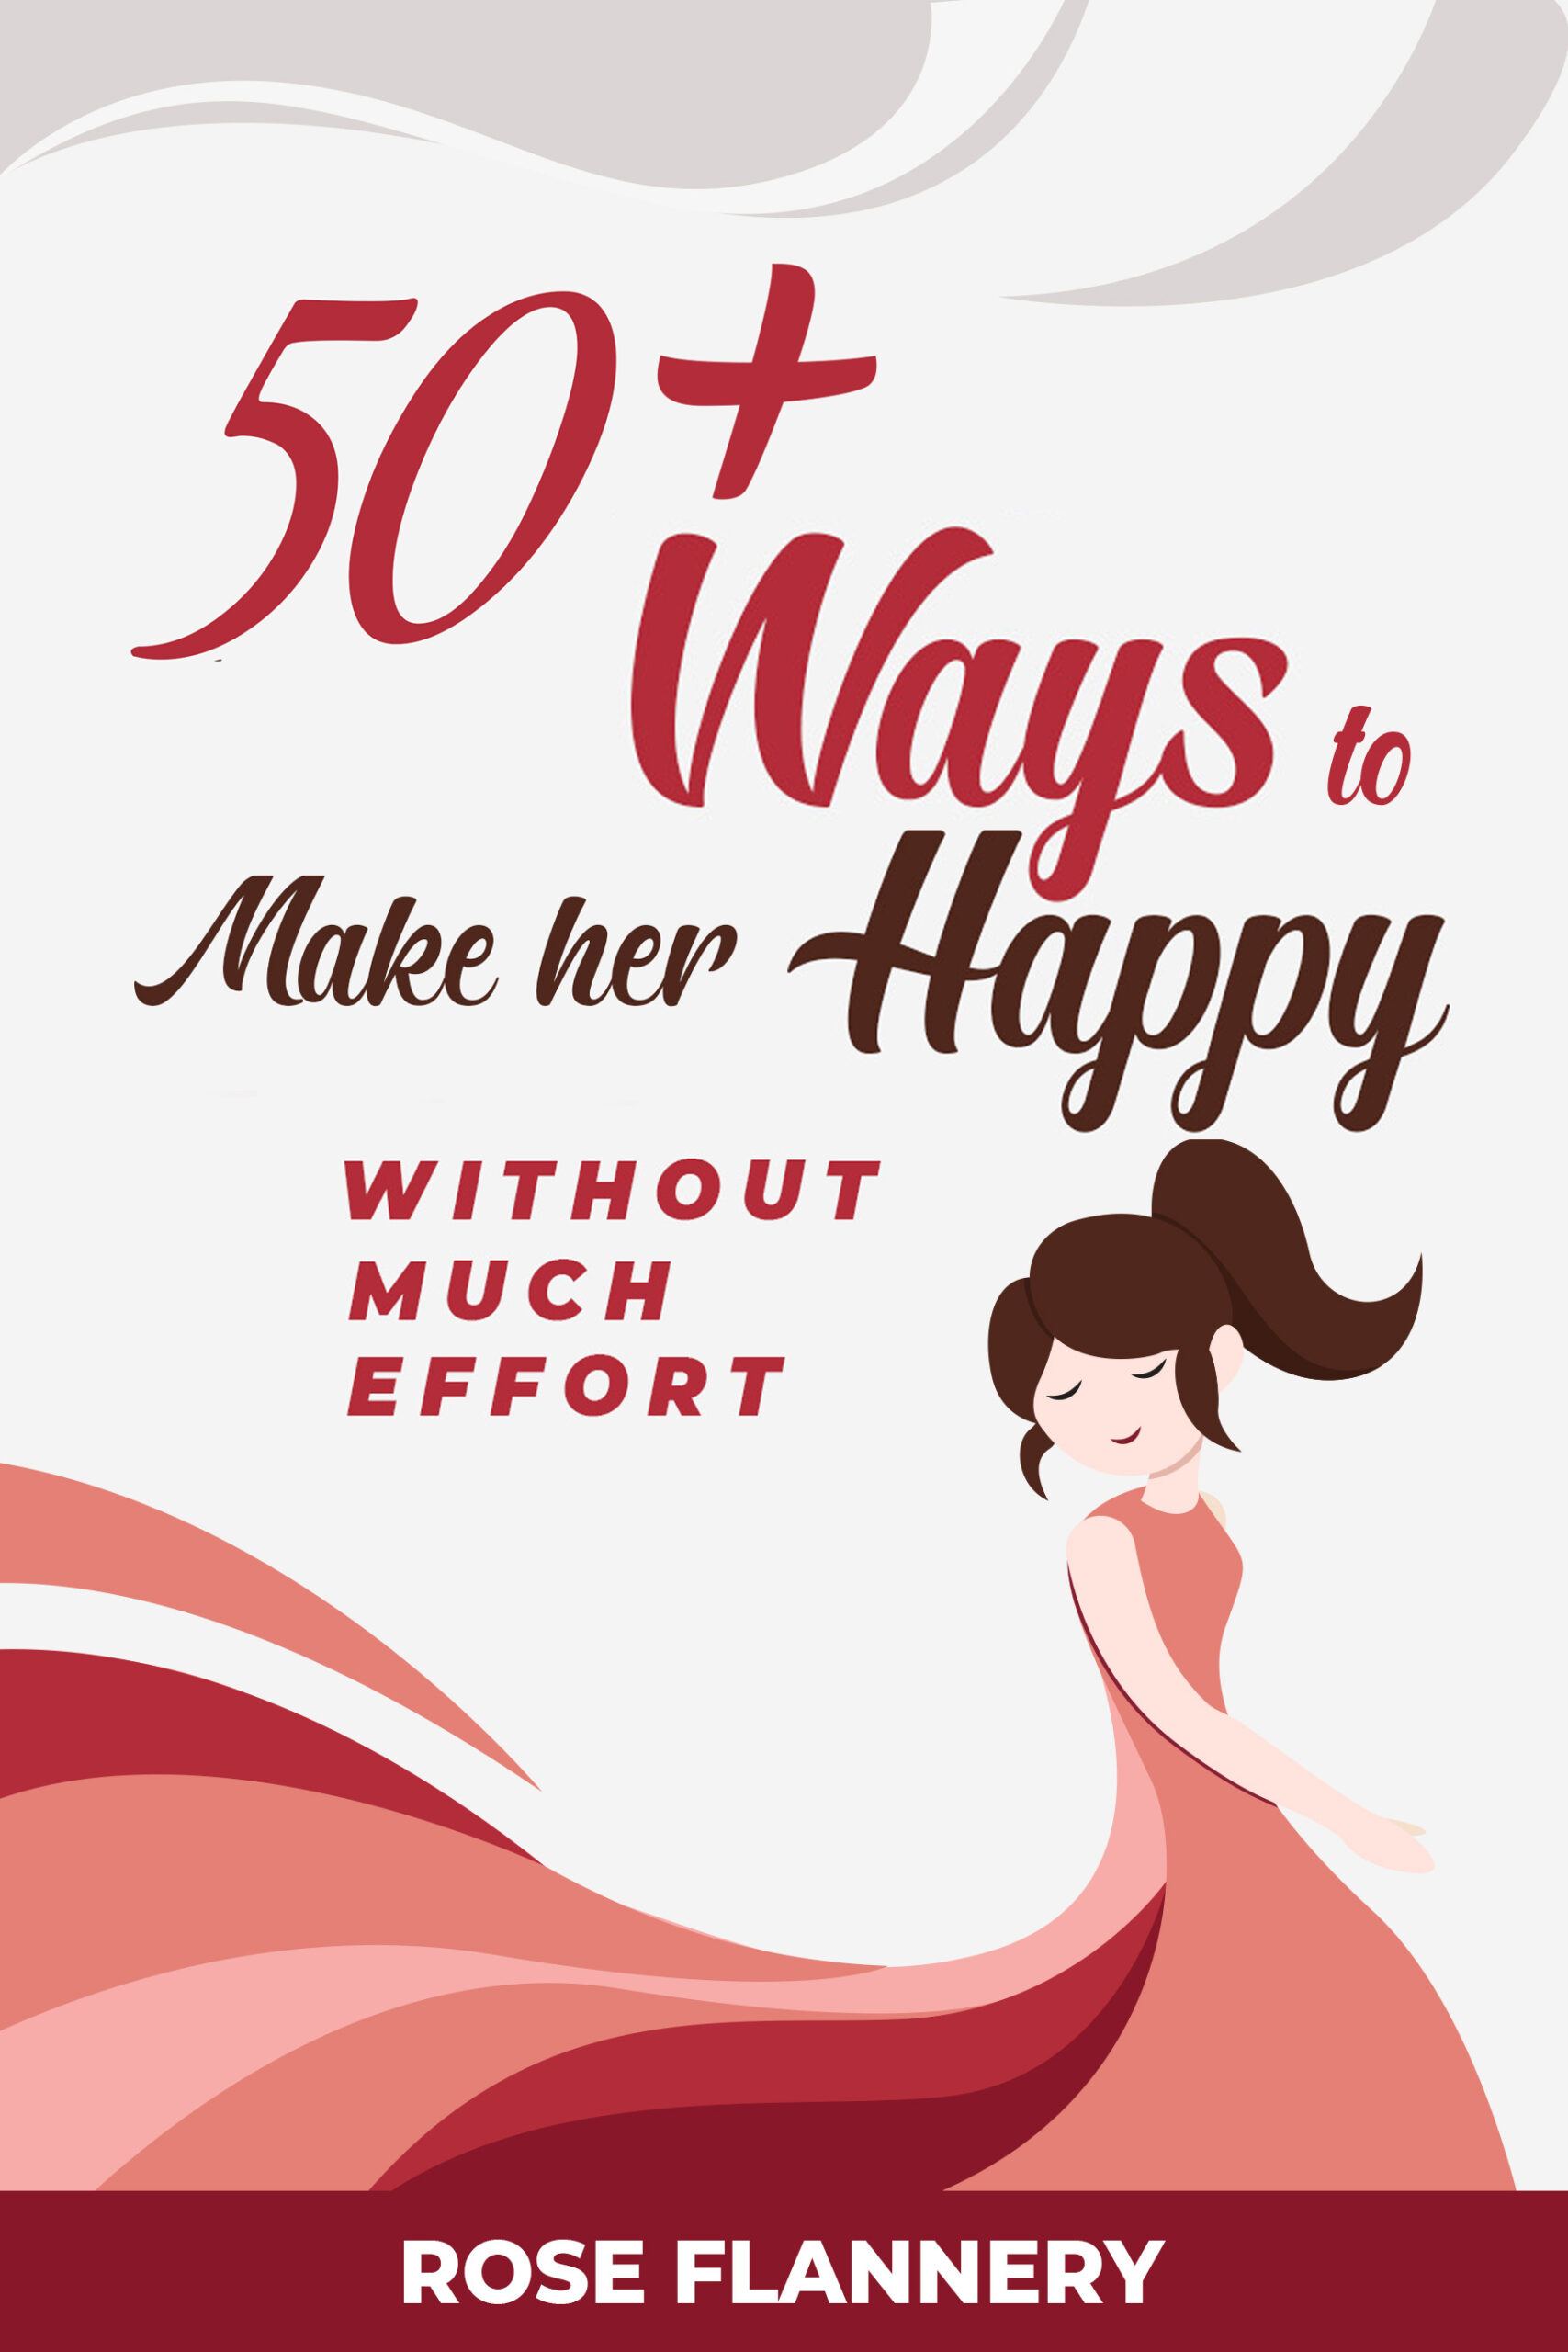 FREE: 50+ Ways to Make Her Happy Without Much Effort by Rose Flannery